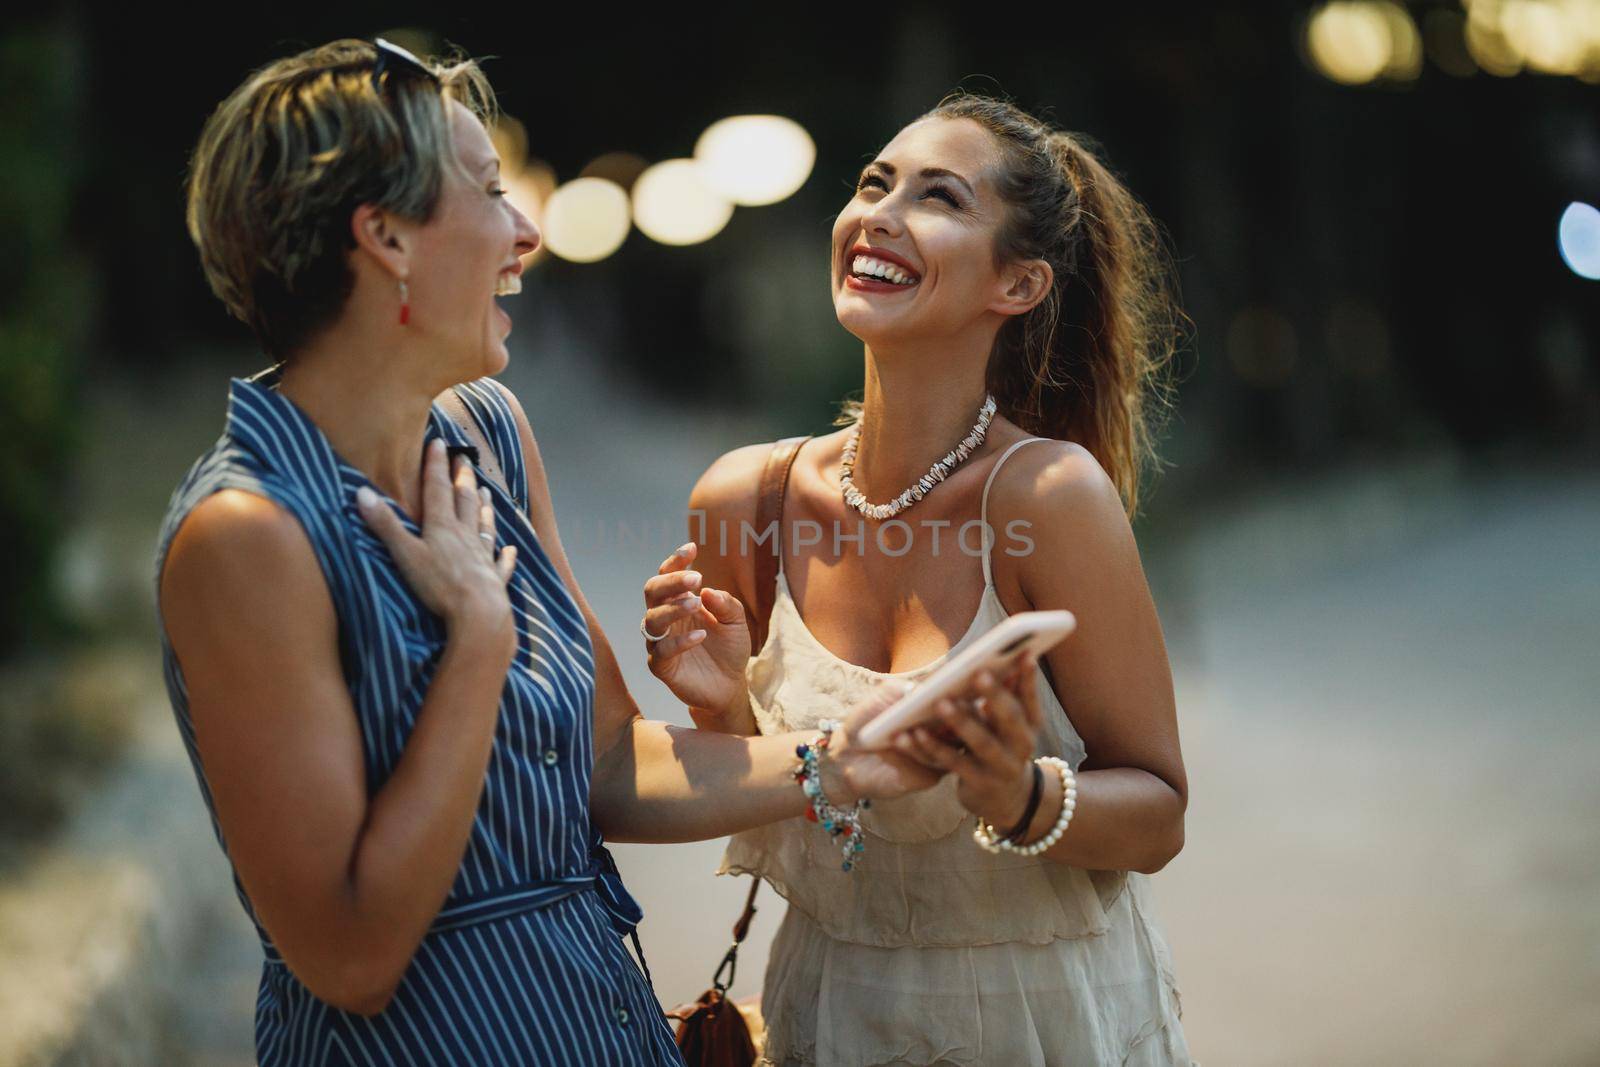 Two cheerful young women are having fun and using a cellphone together while enjoying a summer vacation.